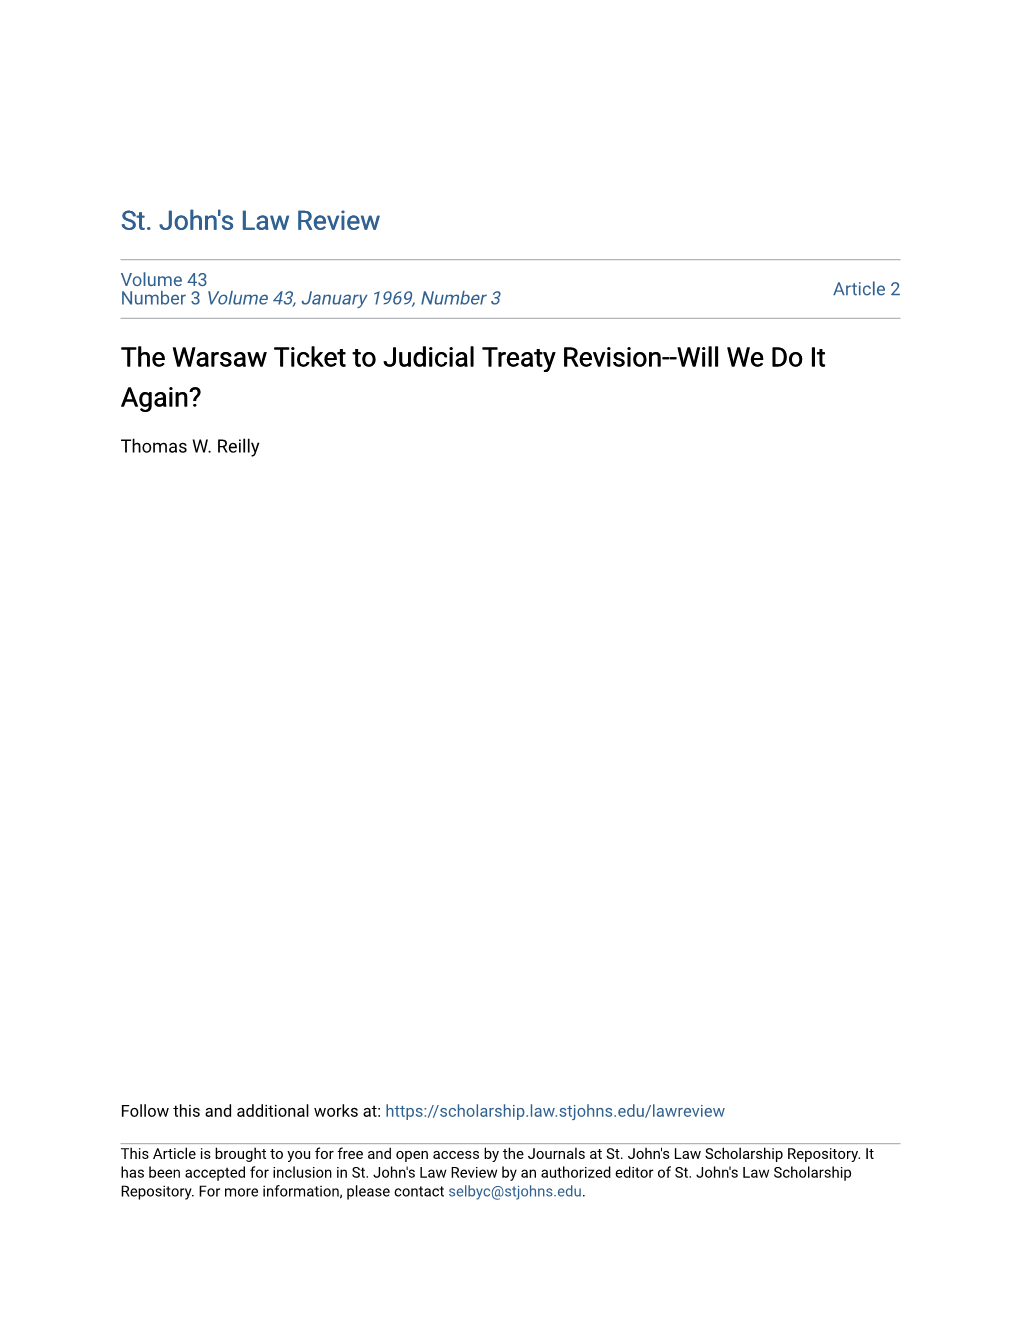 The Warsaw Ticket to Judicial Treaty Revision--Will We Do It Again?